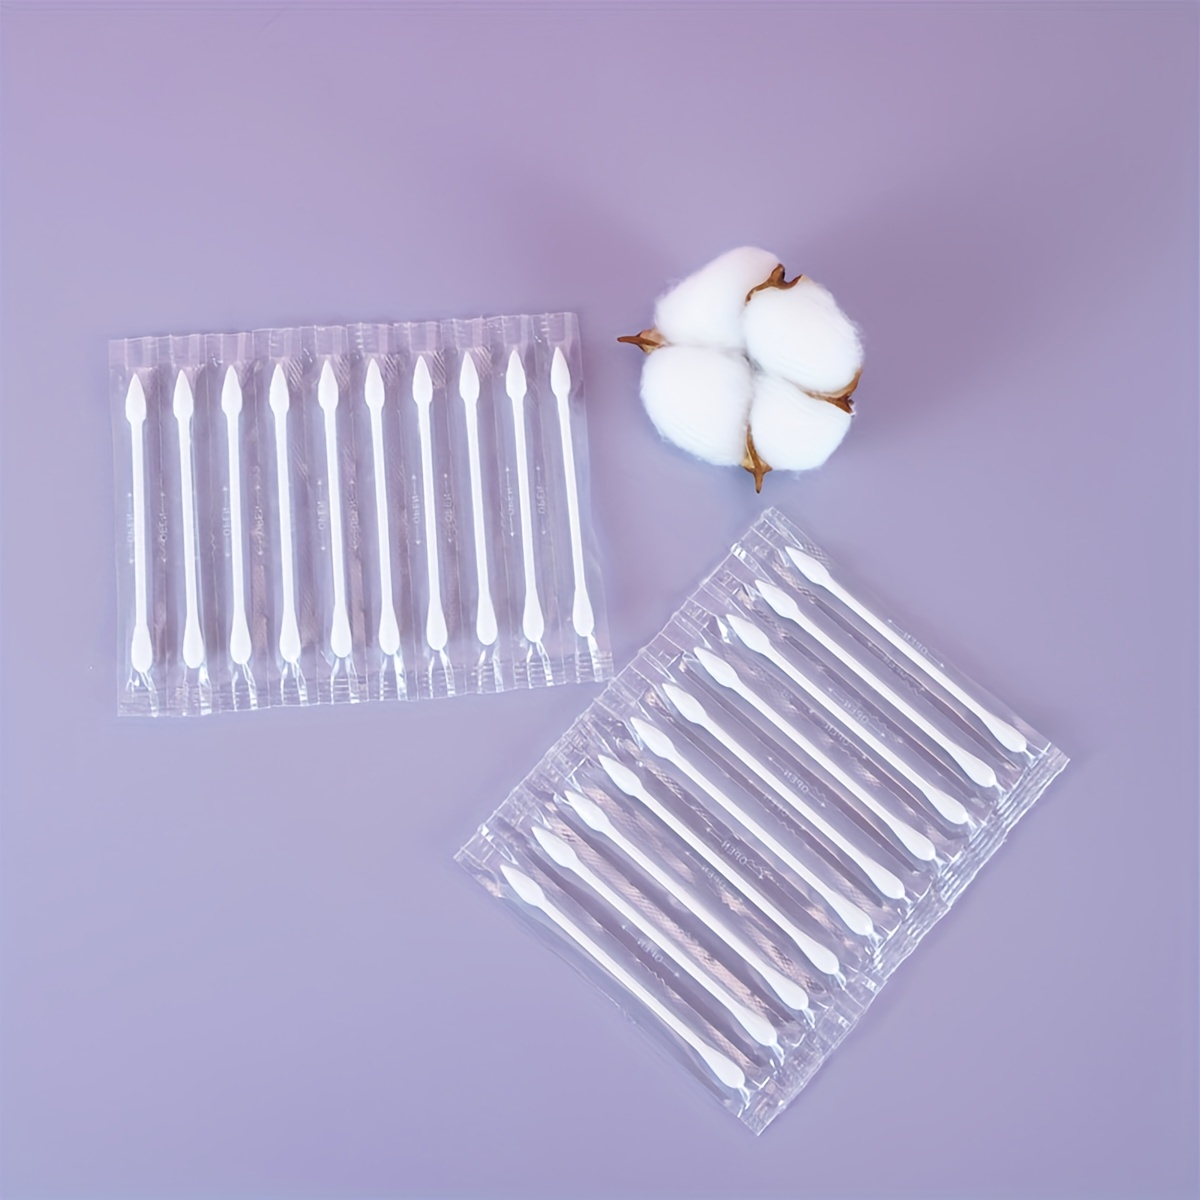 

50pcs Cleaning Cotton Swabs, Round & Pointed Tip Double Head Design For Ear Nose Clean Excellent Beauty Tools For Effective Makeup And Personal Care, Individually Packaged - Travel Accessories